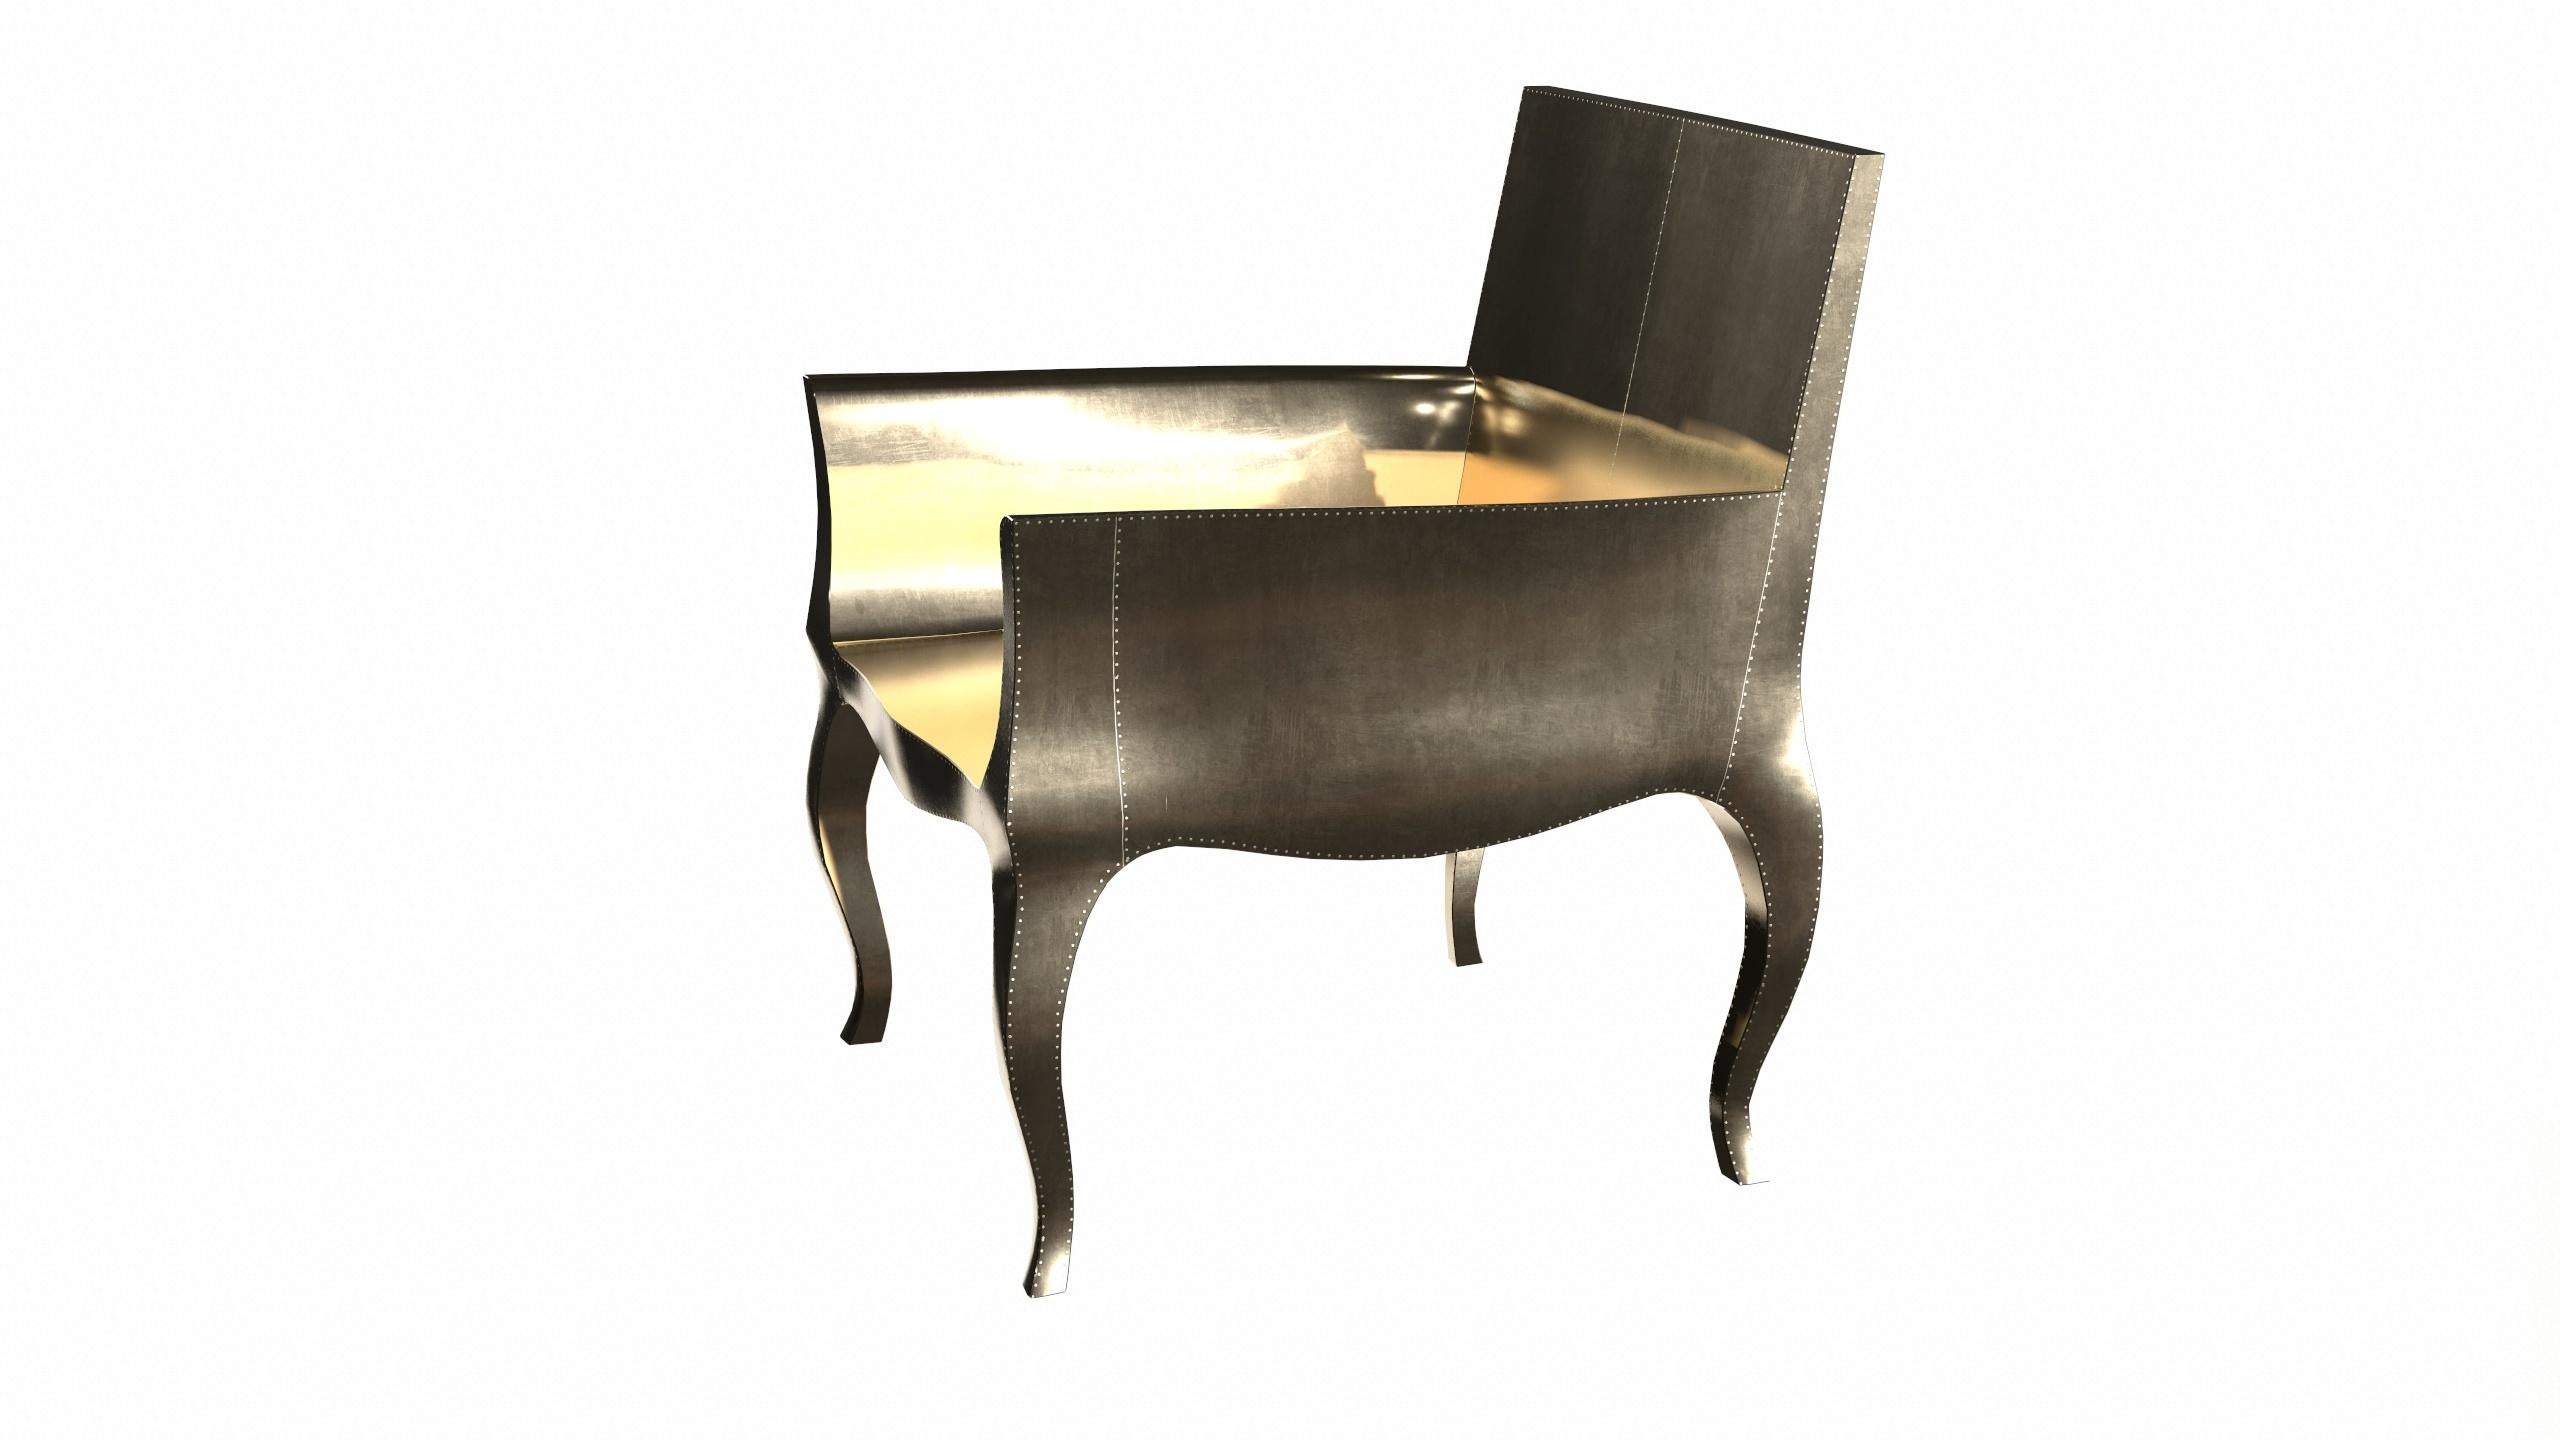 Hand-Carved Art Deco Chairs in Smooth Brass by Paul Mathieu for S. Odegard For Sale